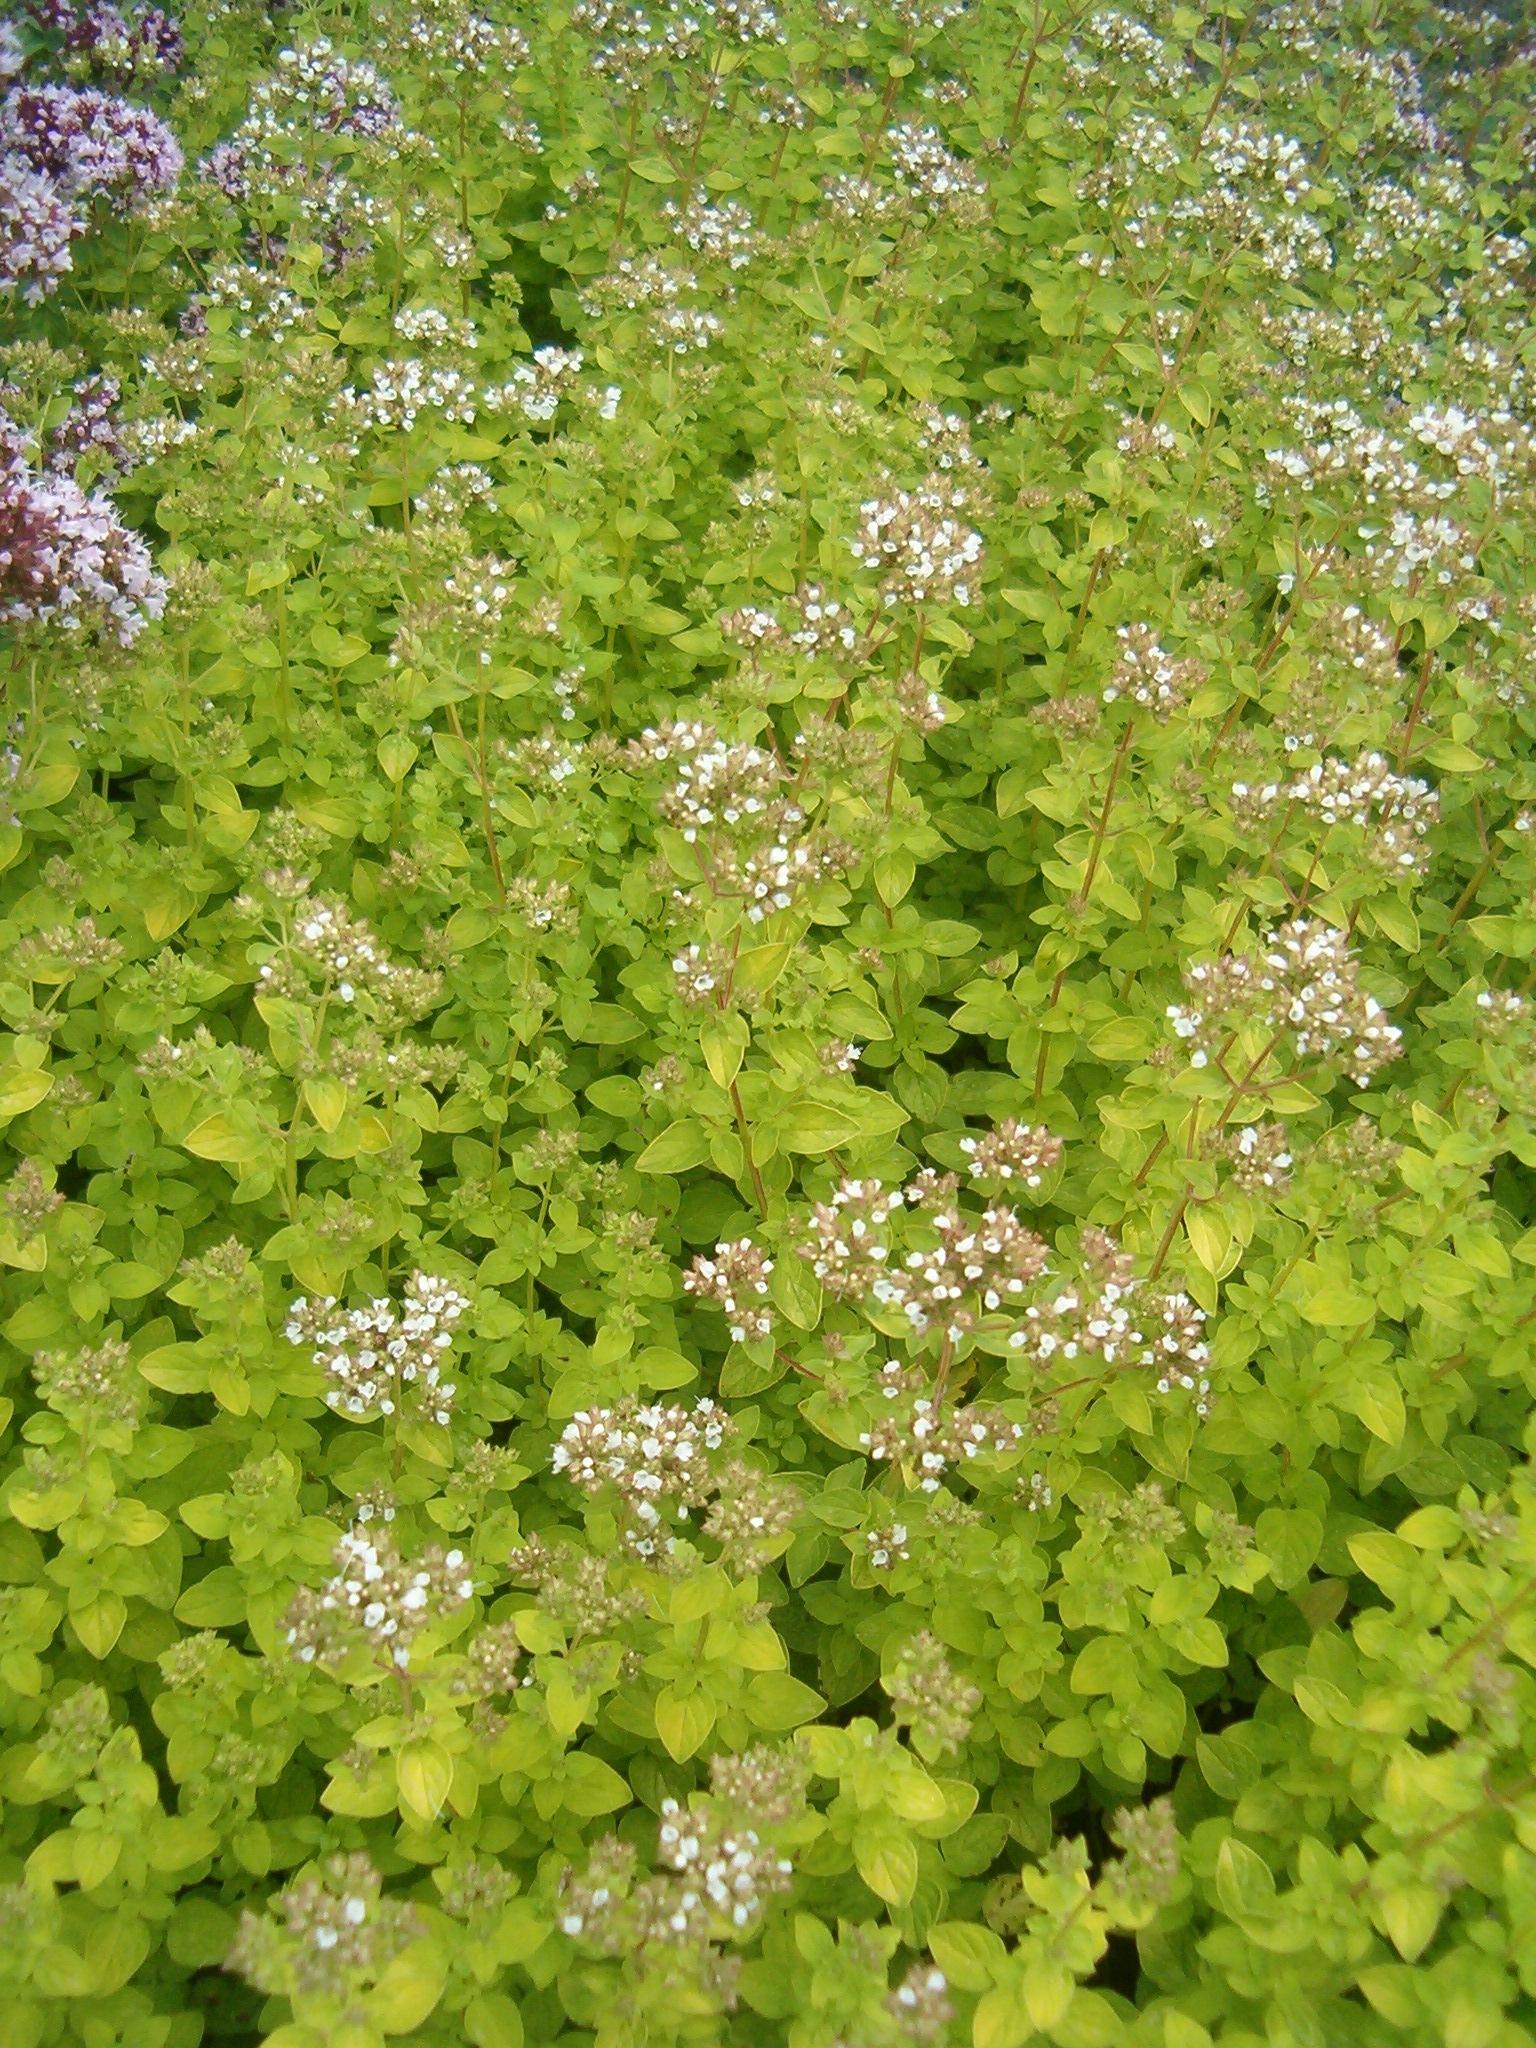 white-brown flowers with lime leaves and brown stems